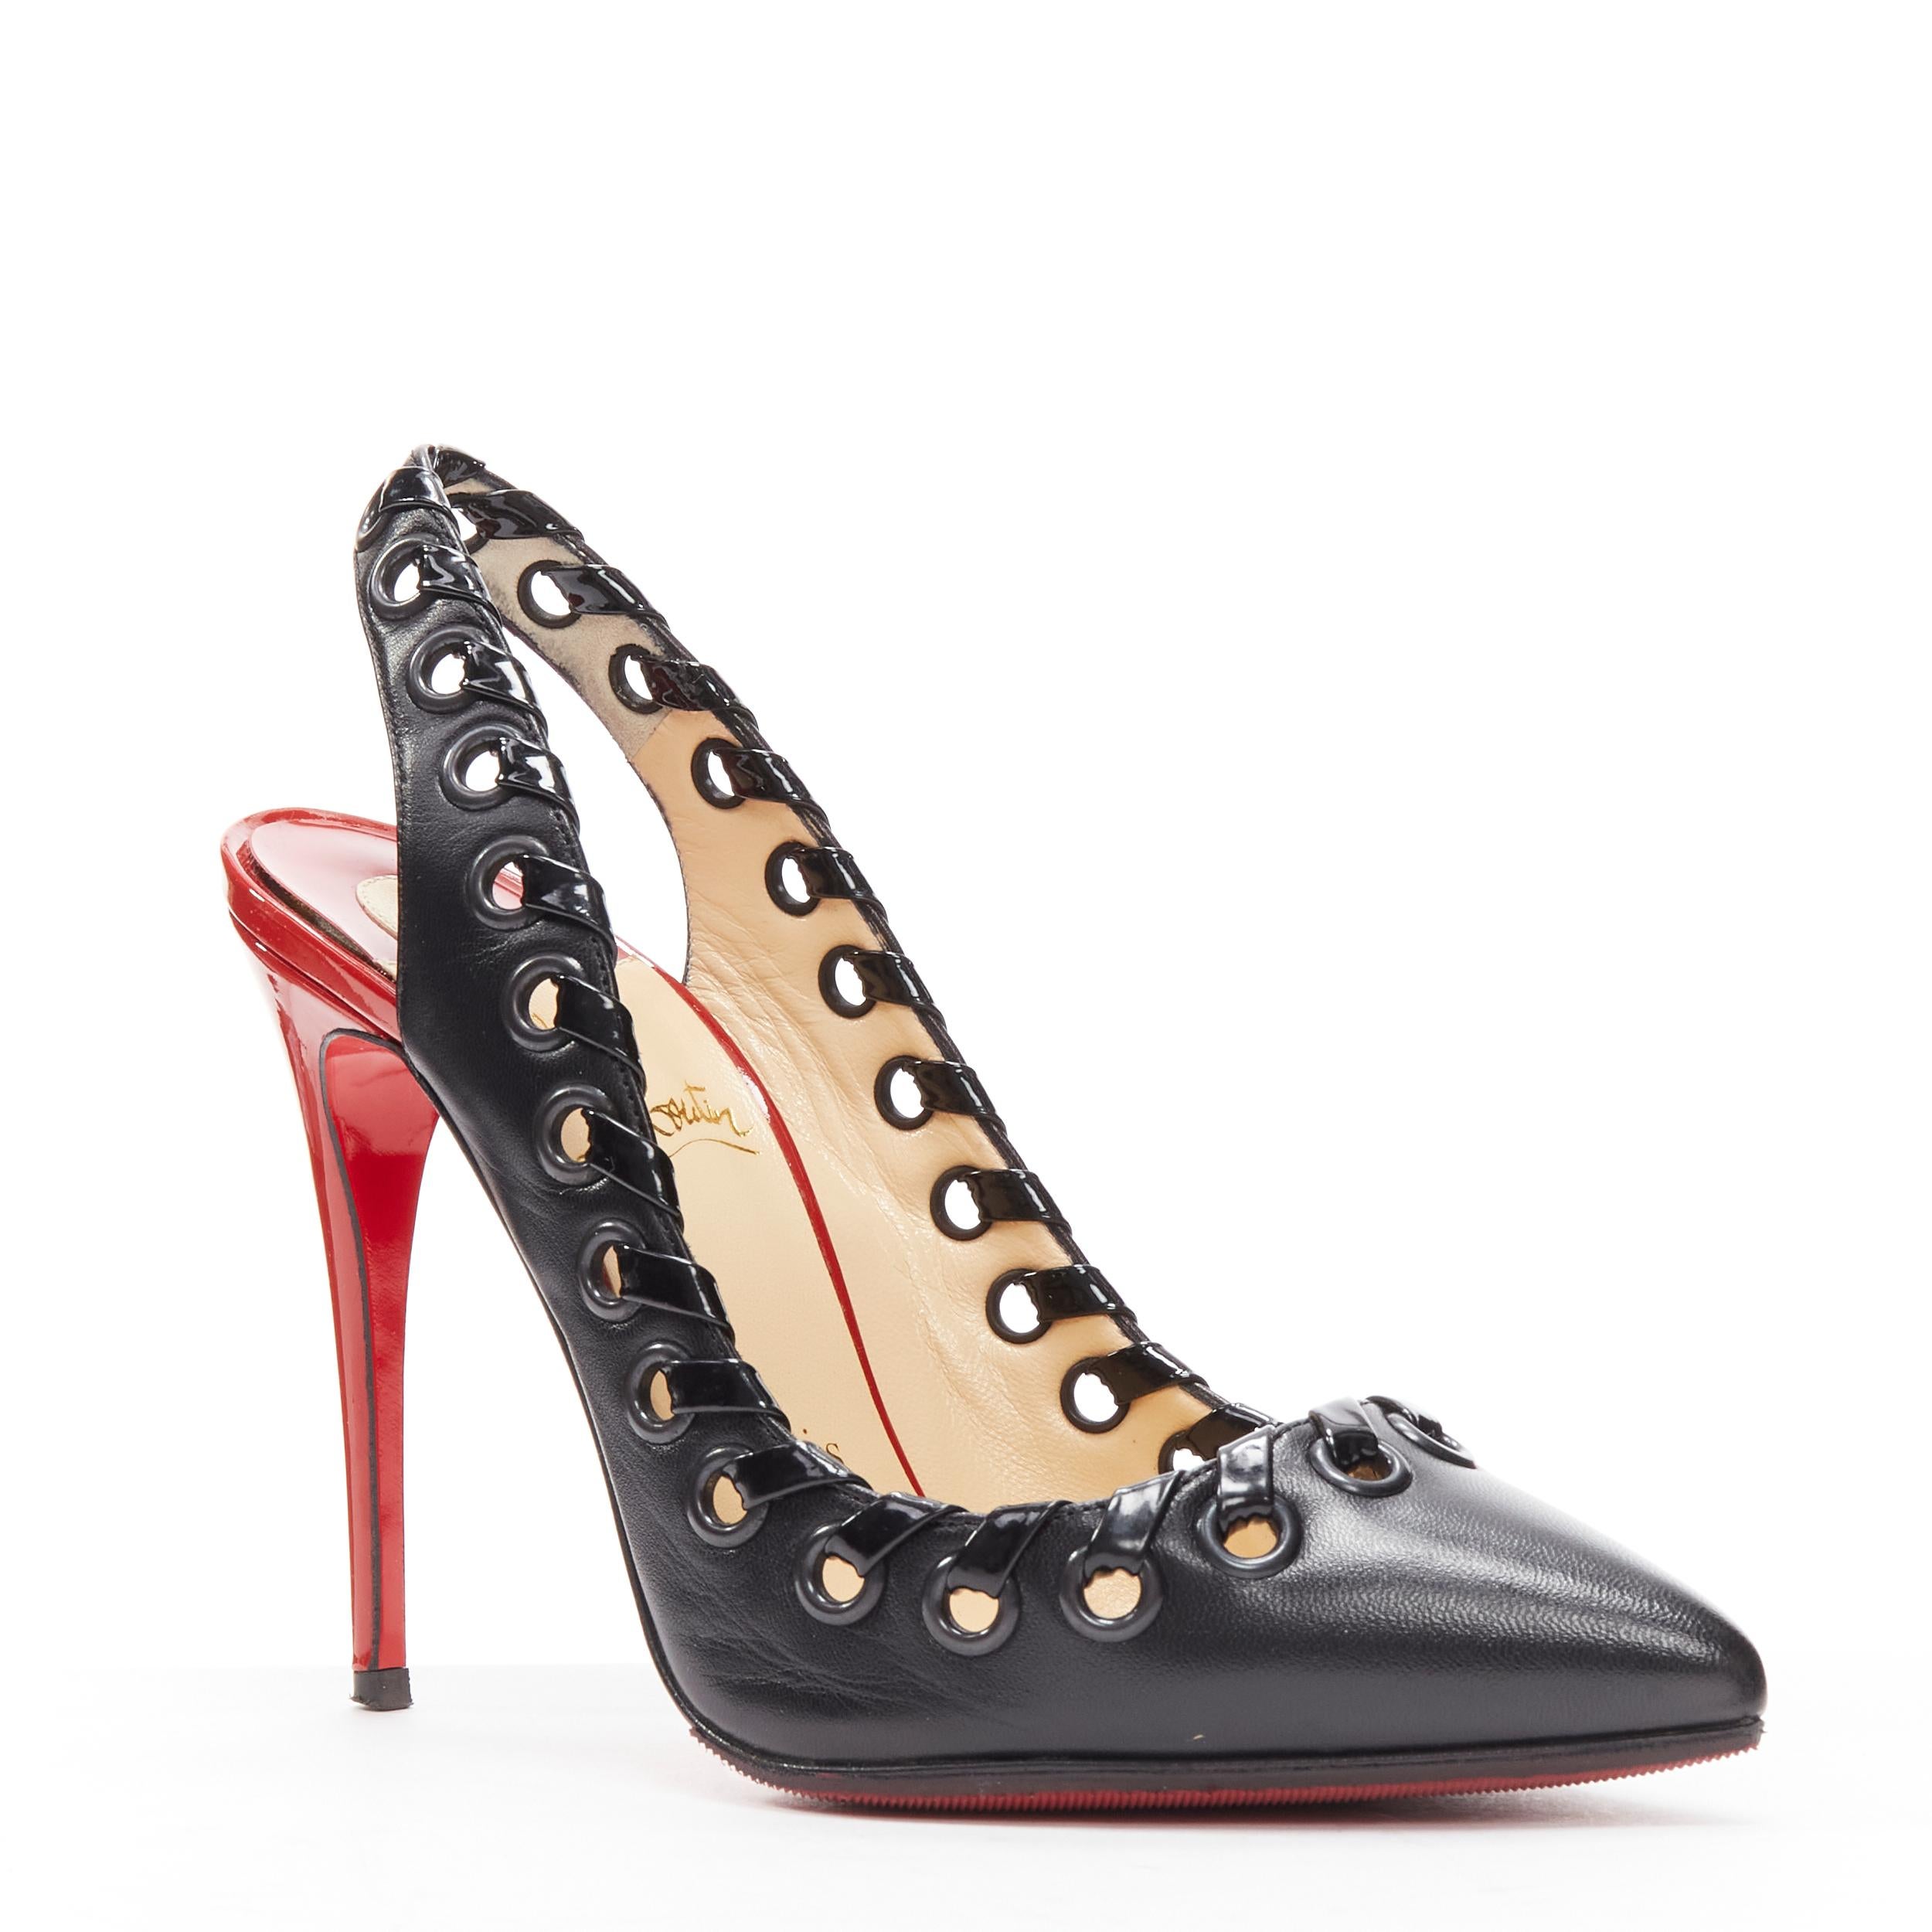 CHRISTIAN LOUBOUTIN Ostri 100 black woven detail sling high heel pumps EU36.5
Reference: TGAS/D00167
Brand: Christian Louboutin
Model: Ostri 100
Material: Leather
Color: Black
Pattern: Solid
Closure: Slingback
Lining: Nude Leather
Extra Details: